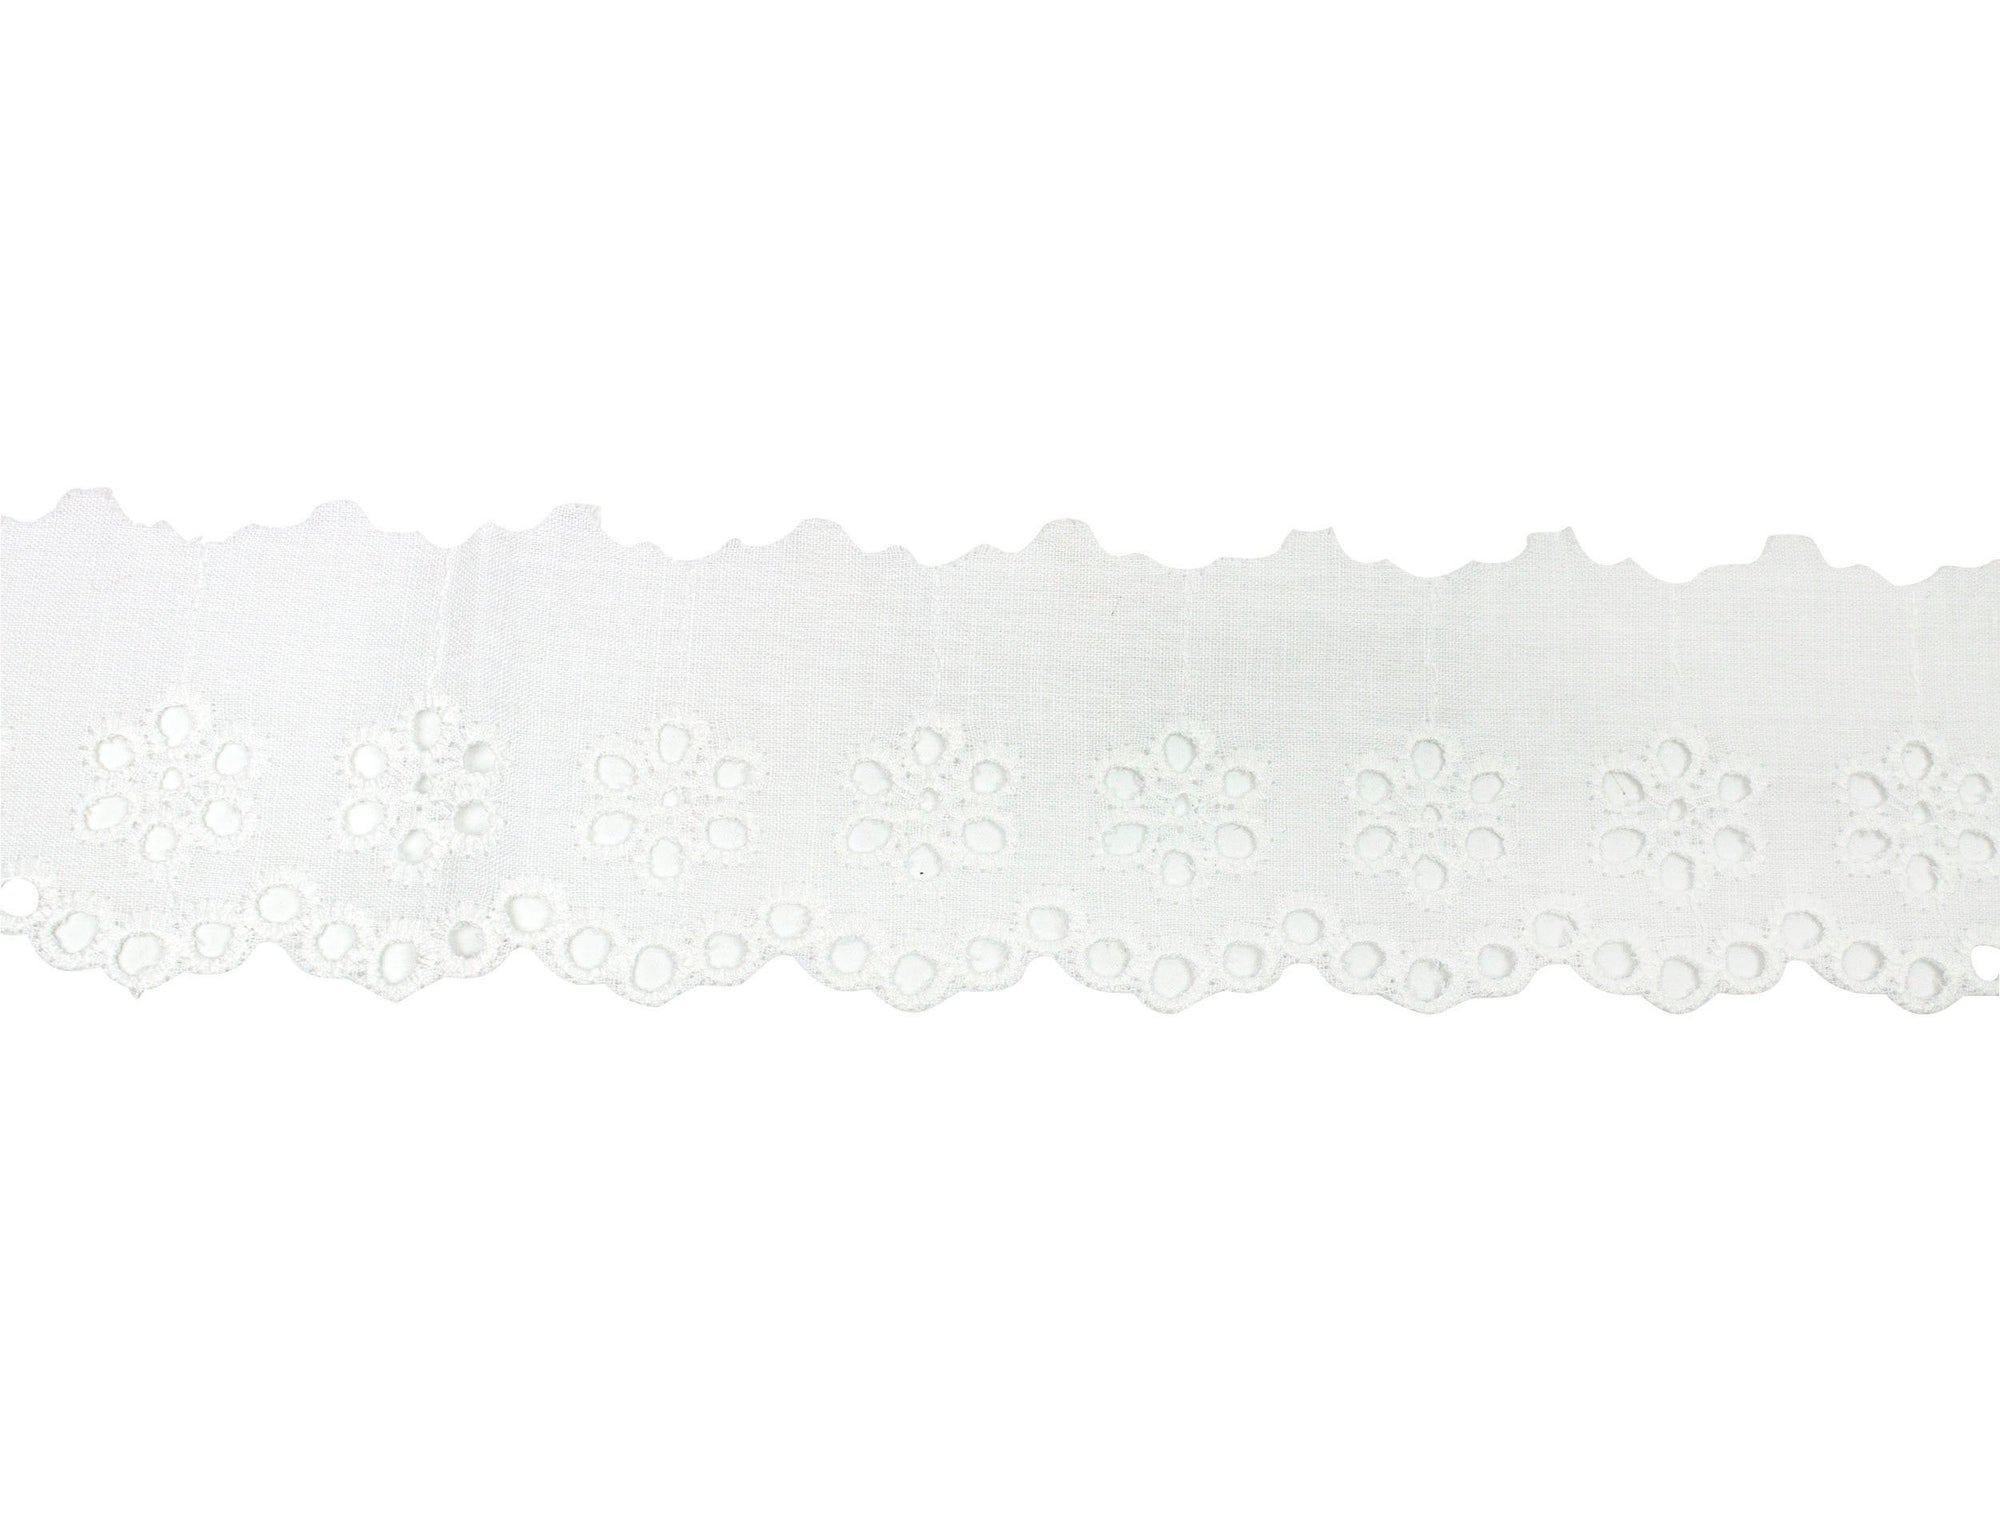 Vintage Lace Trim White Scalloped Floral Eyelet 3" - Sold by the Yard - Humboldt Haberdashery